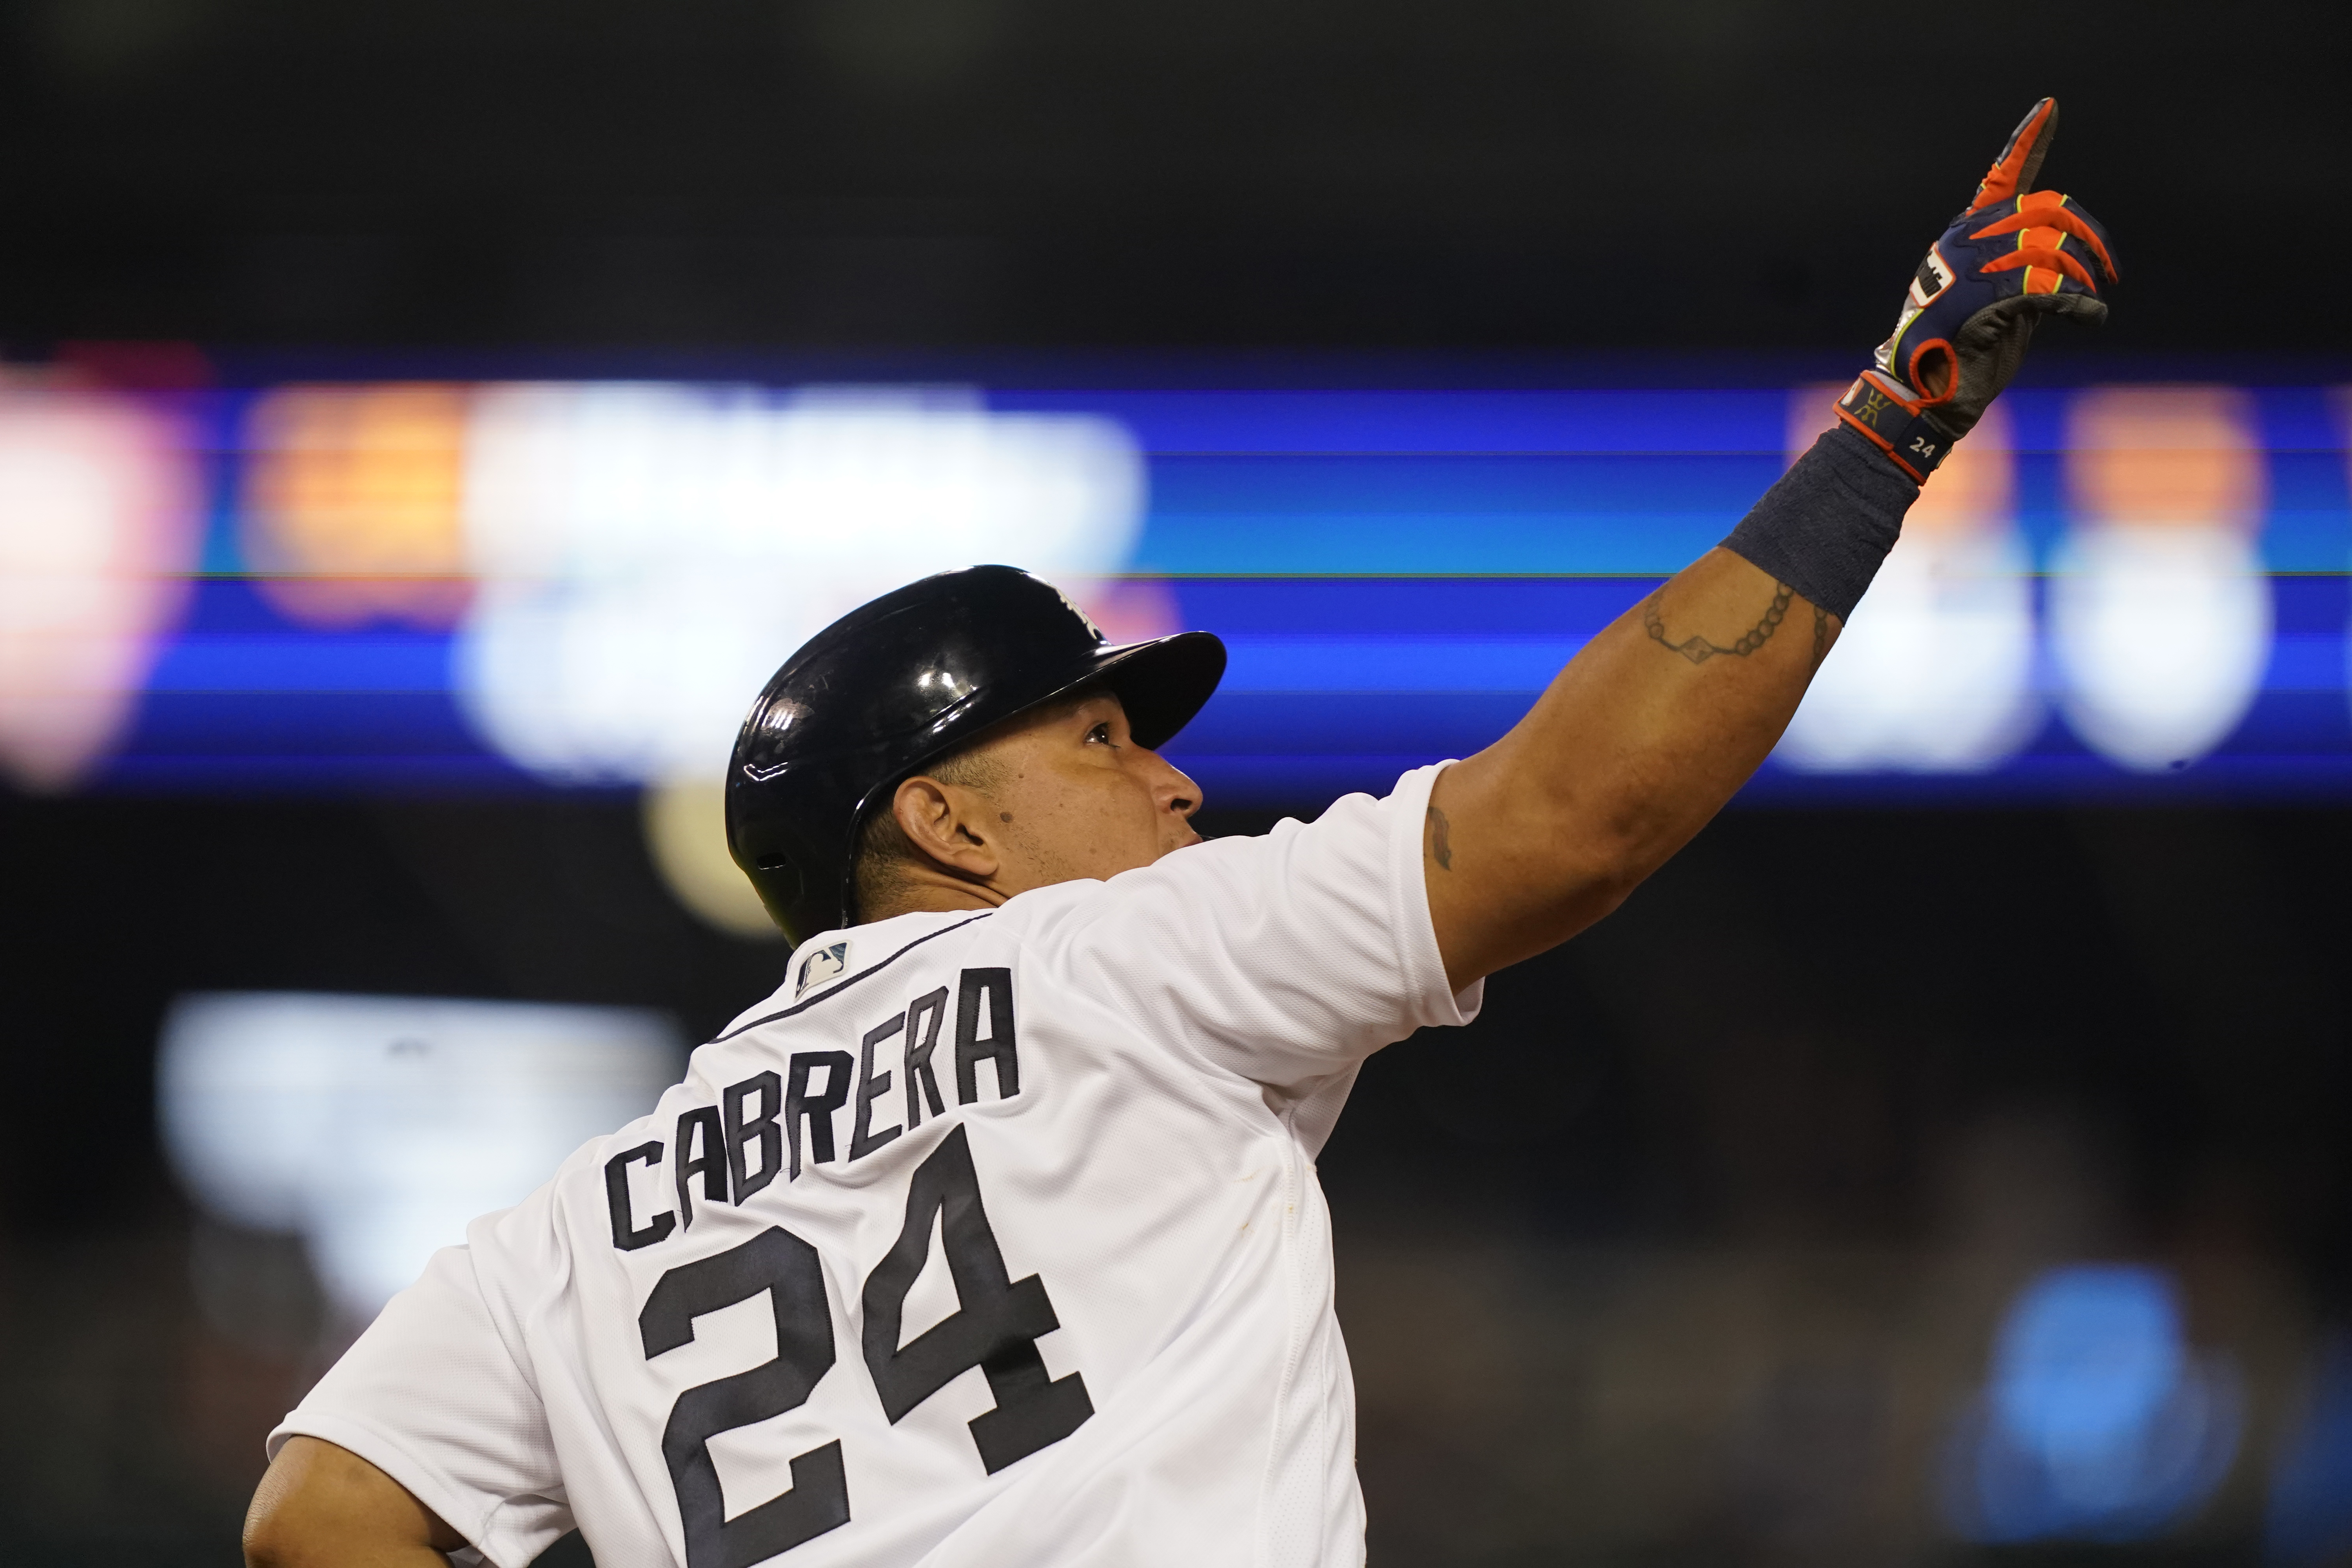 Cabrera 2 HRs and Mize solid for Tigers in 6-2 win over O's - The